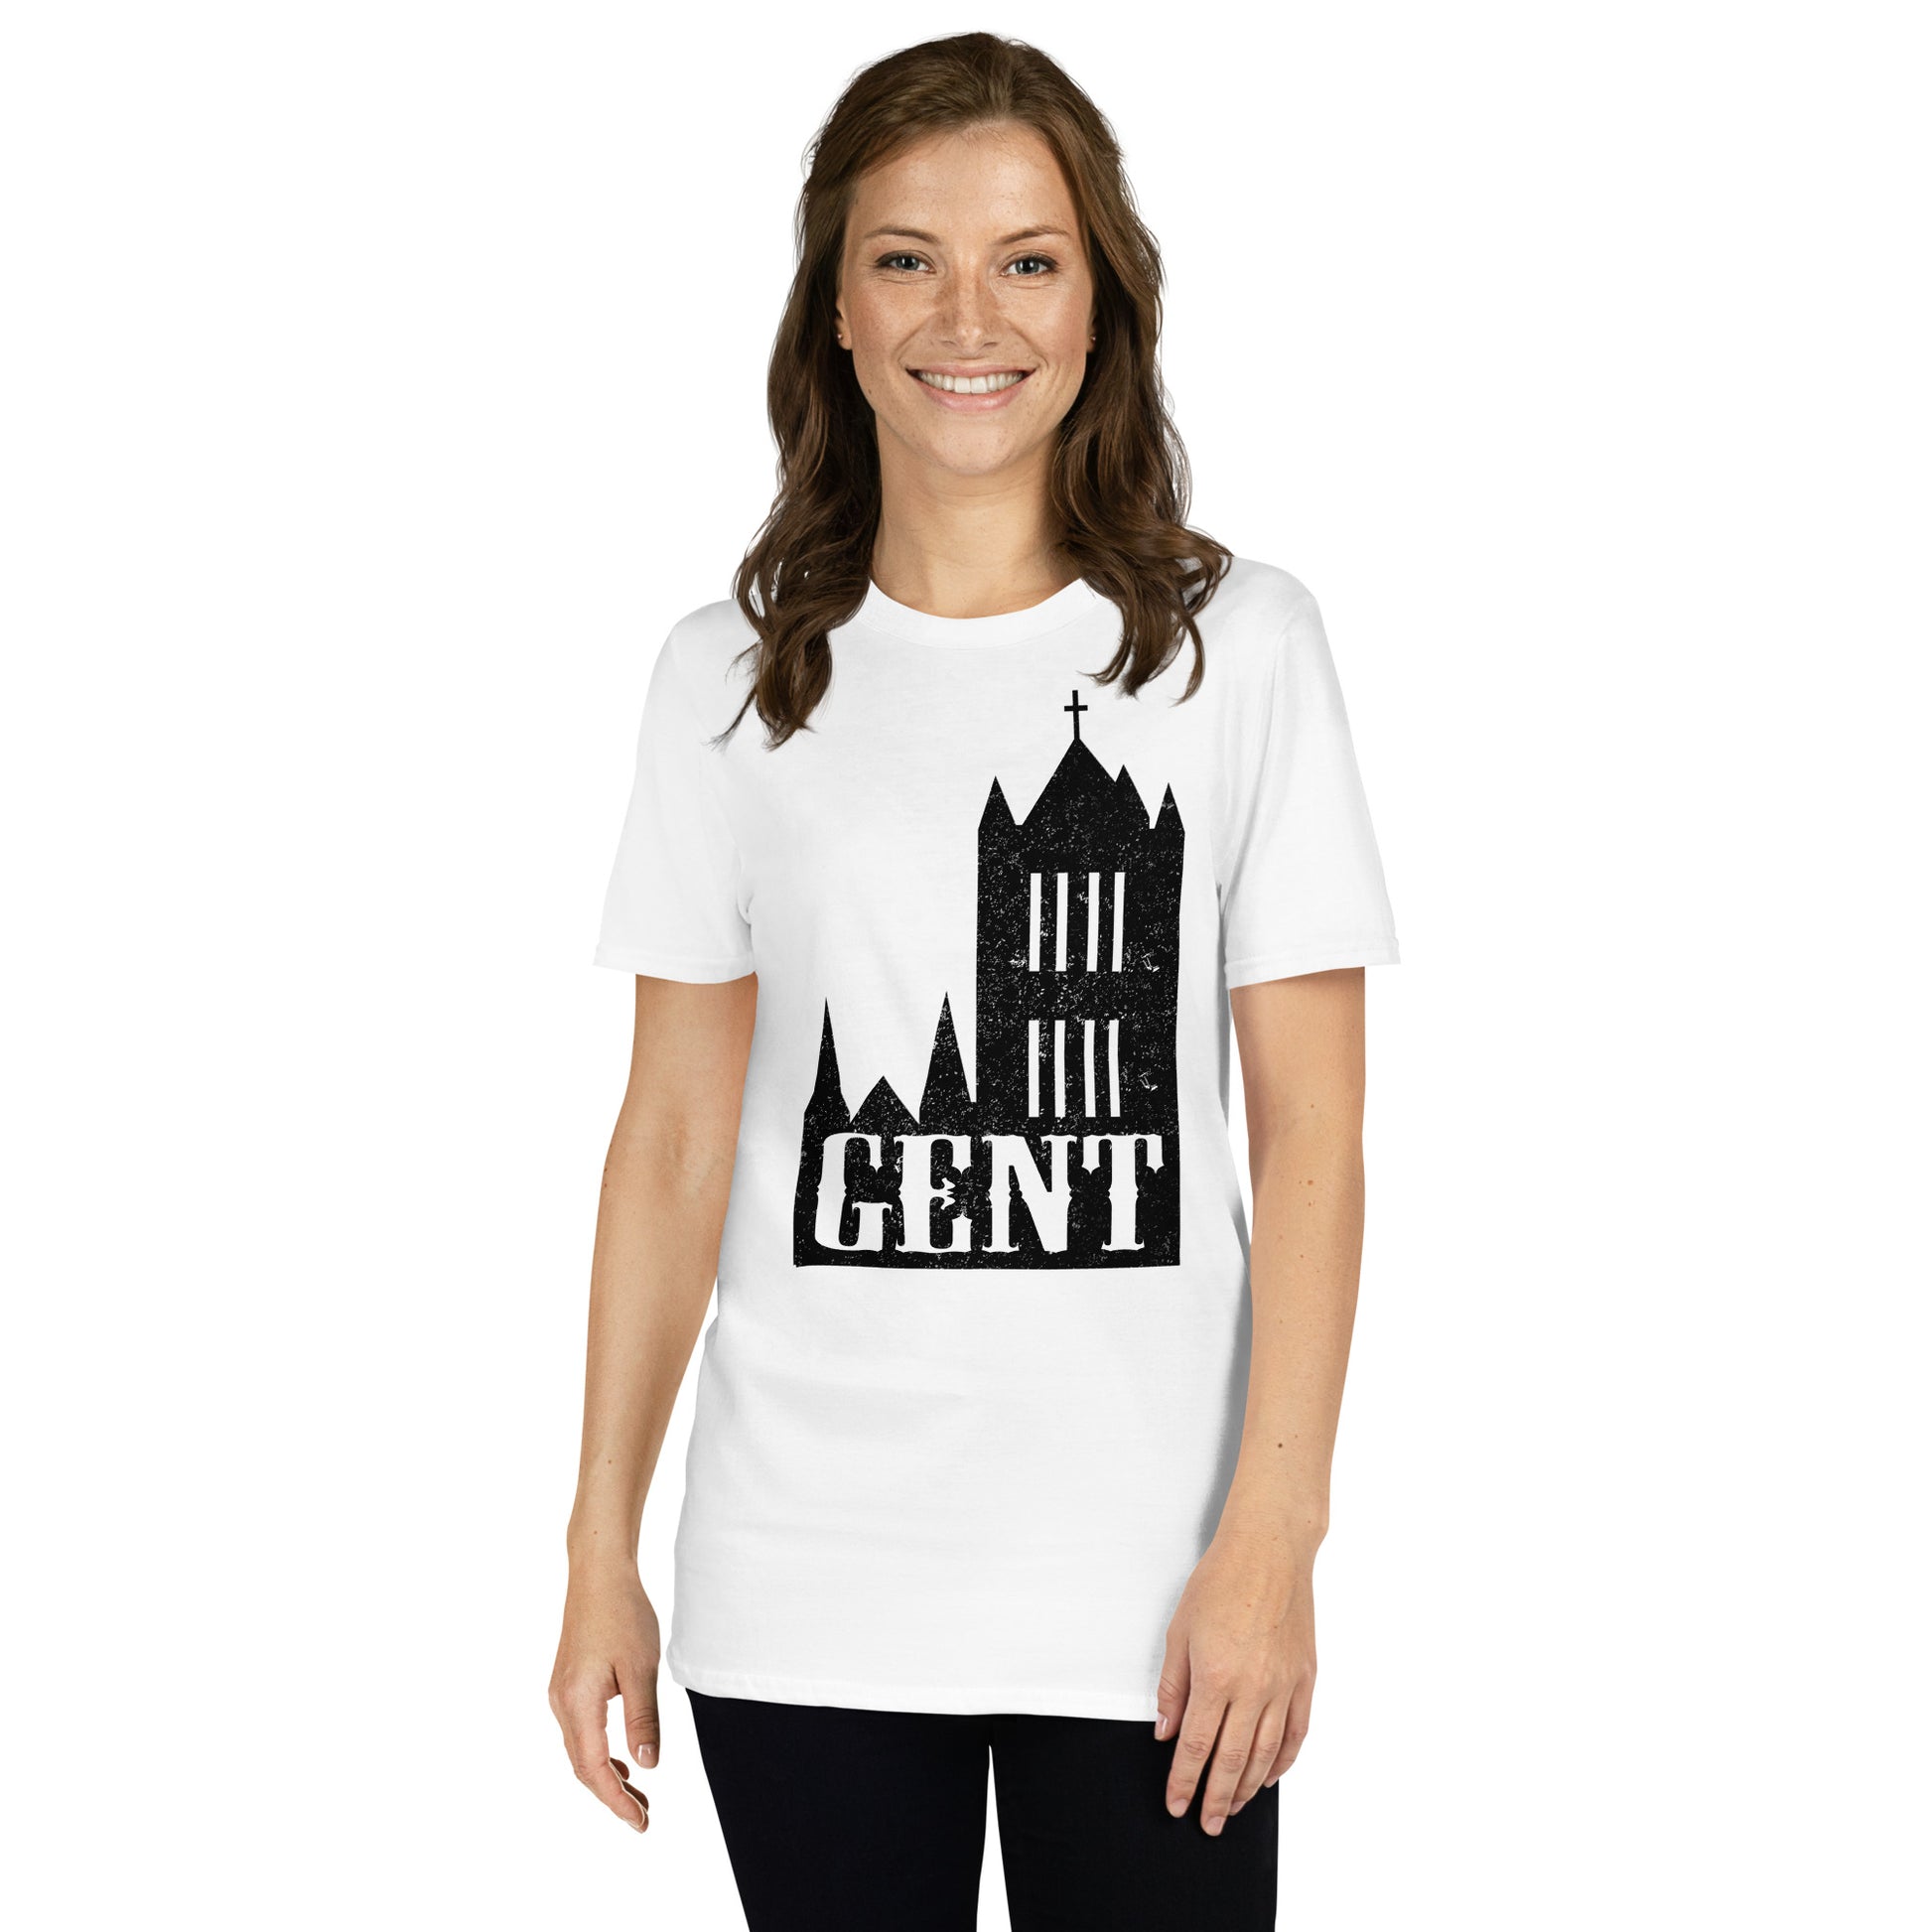 White Stylish T-shirt displaying 'Gent' and Gravensteen Castle, representing the city of Ghent